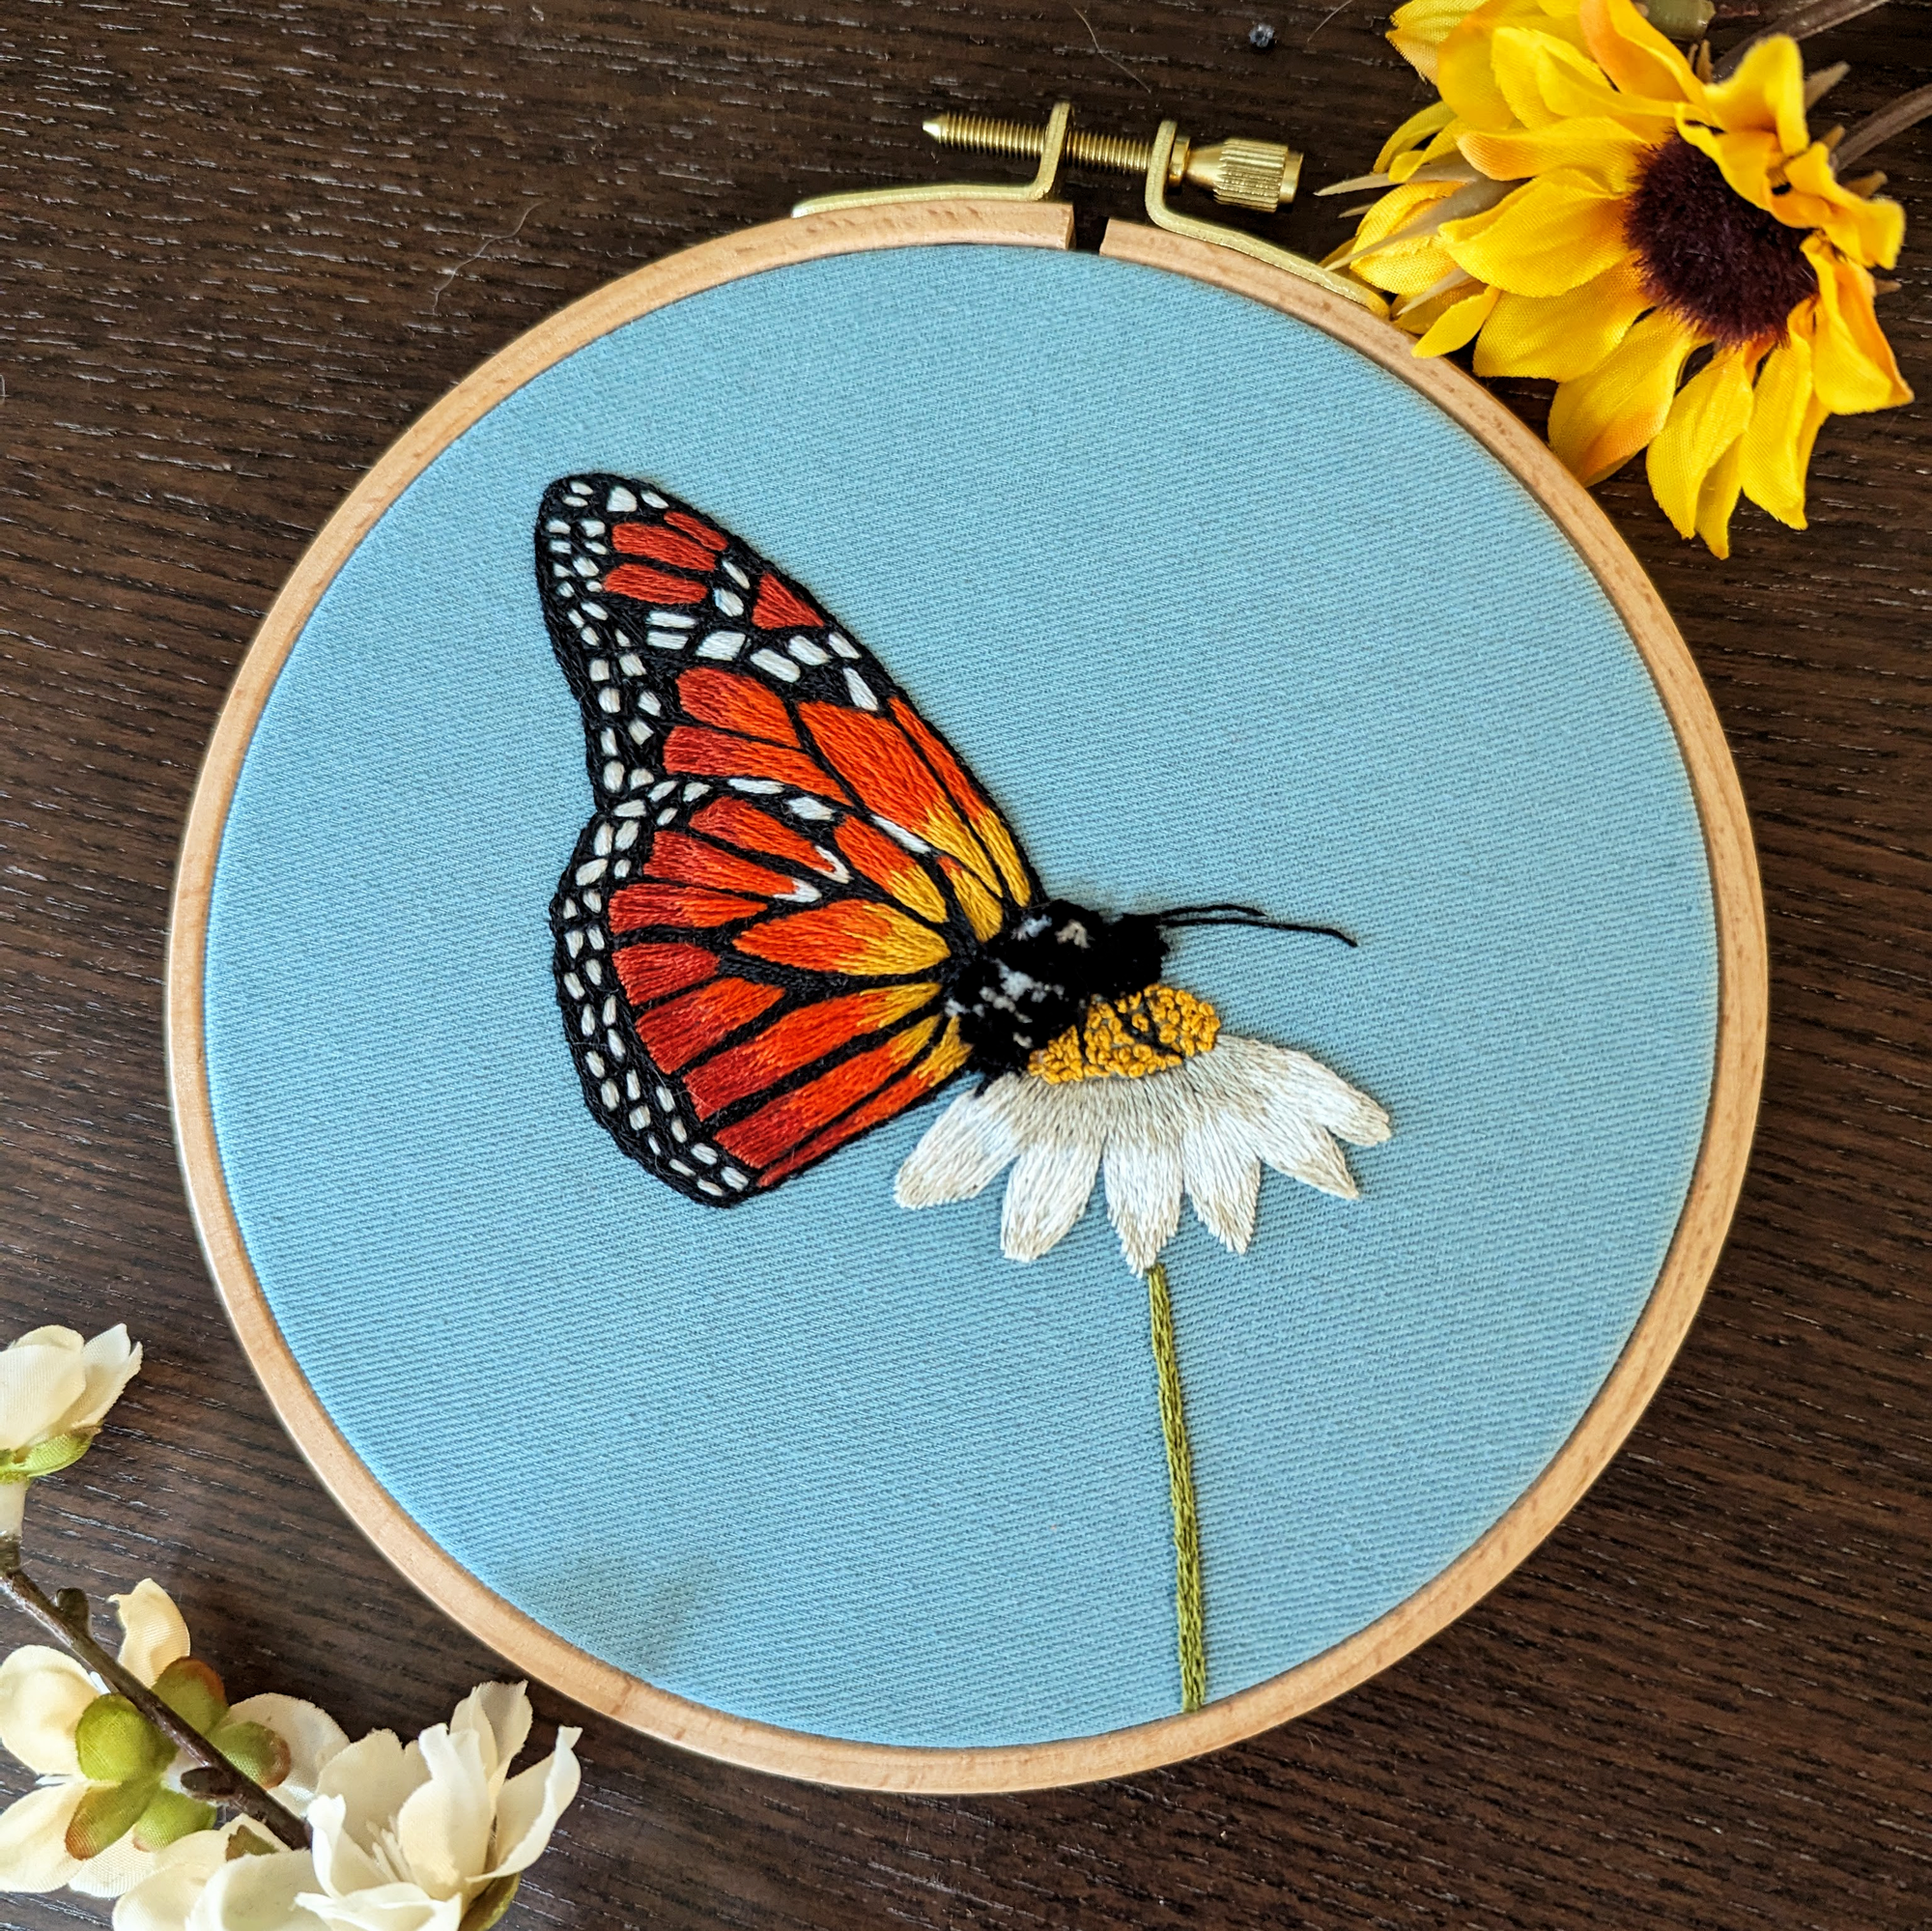 EMBROIDERY CLASS: Thread Painting a Butterfly